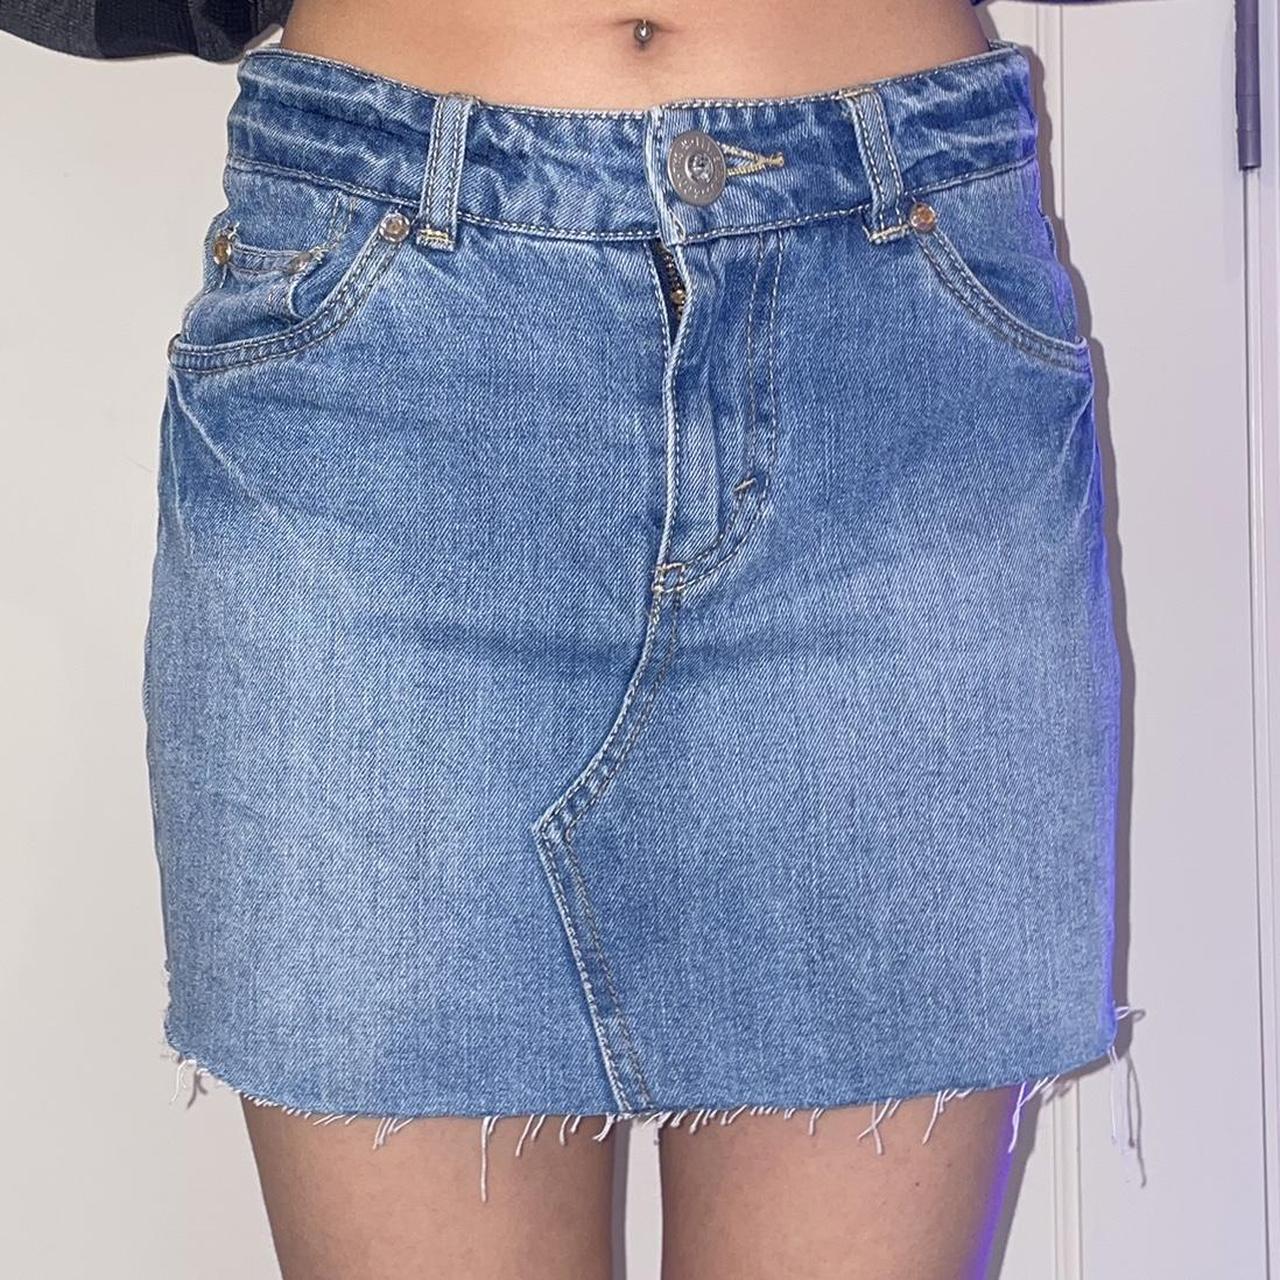 Levi’s Jean mini skirt with small built-in black... - Depop